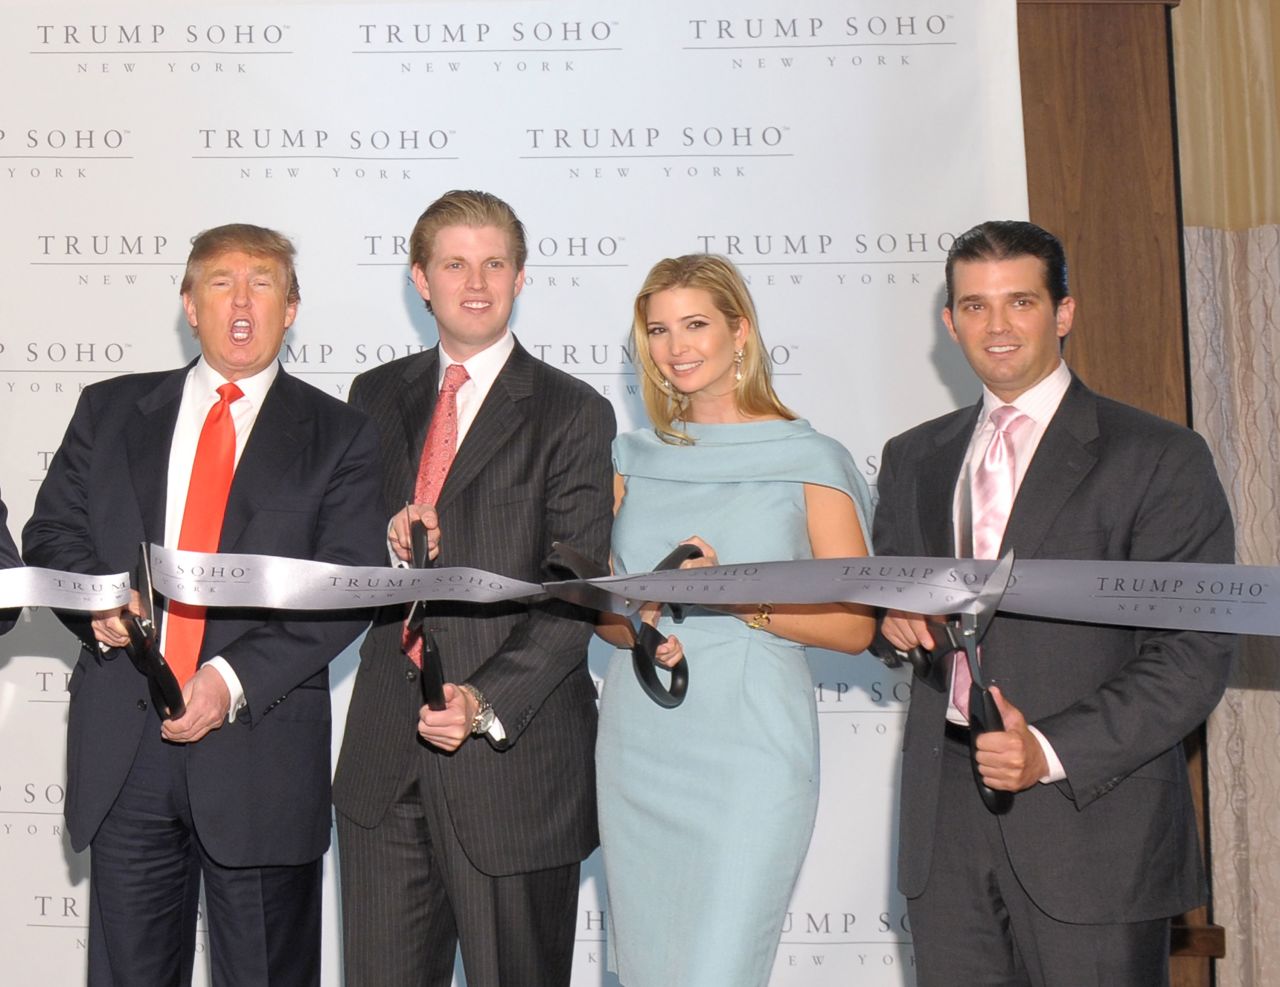 Trump and his children Eric (second from left), Ivanka and Donald Jr. attend the ribbon-cutting ceremony for Trump SoHo New York at Trump SoHo on April 9, 2010, in New York City.